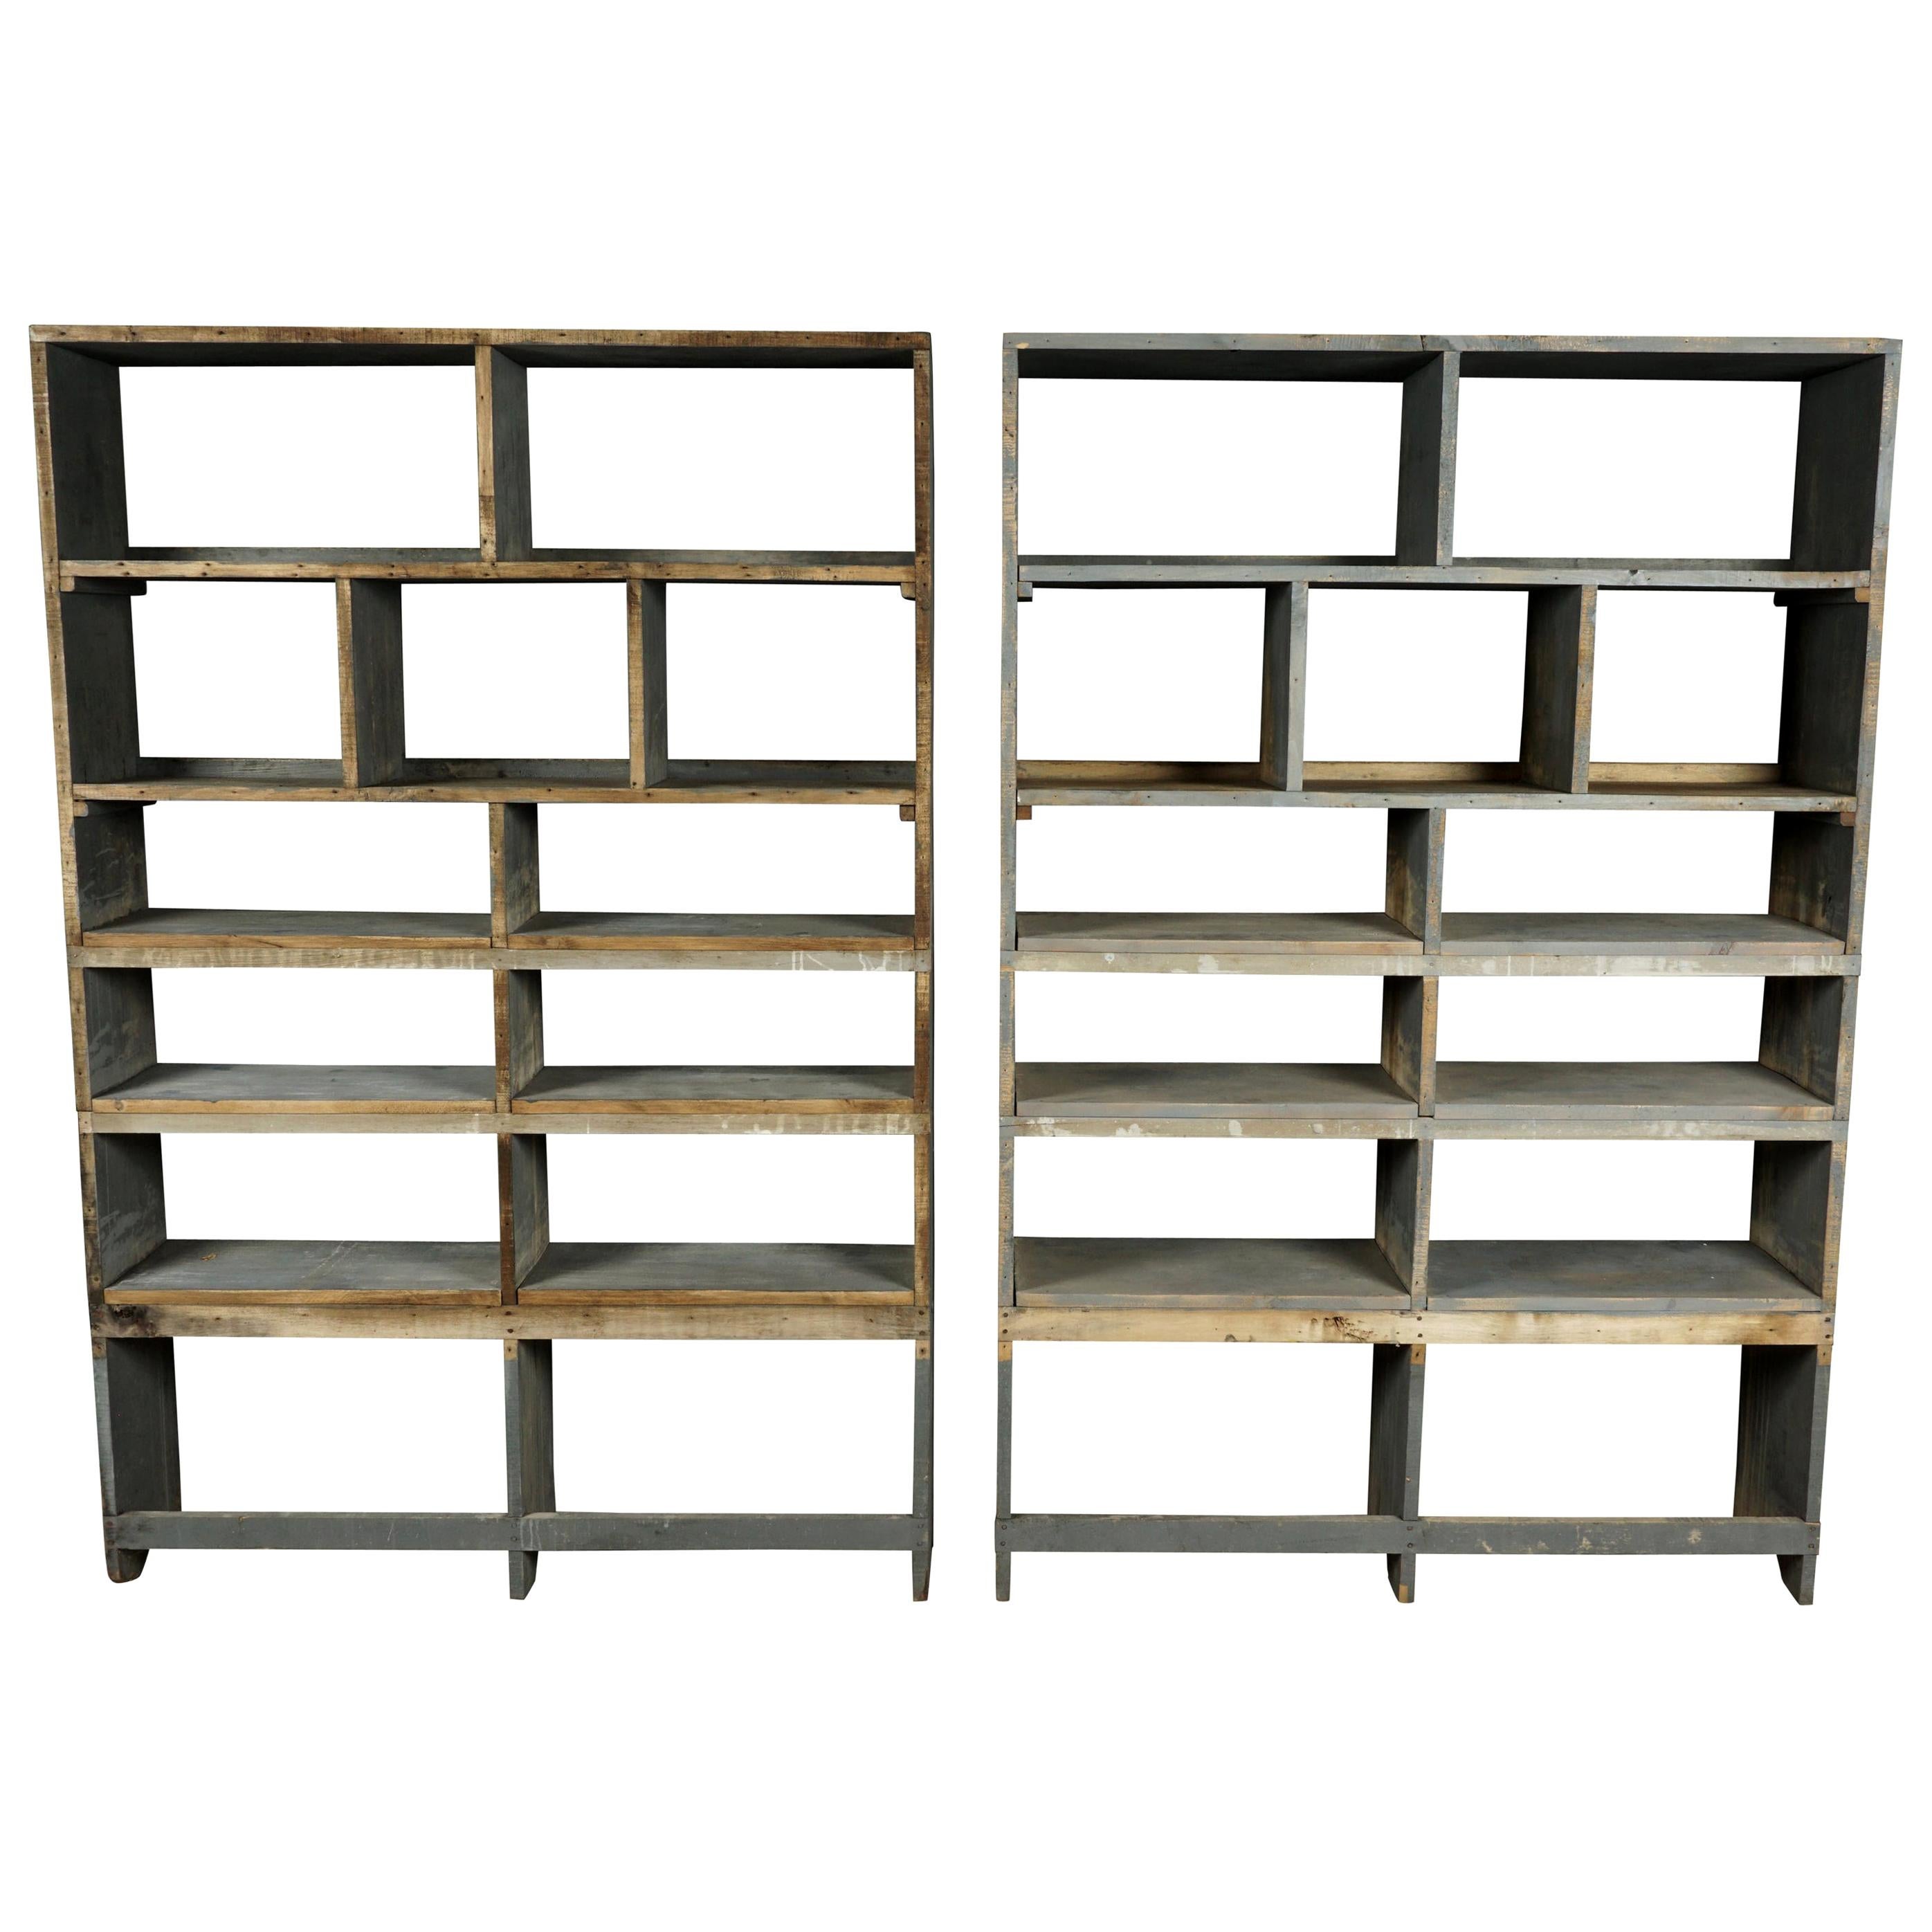 Pair of Vintage Industrial Bookcases from France, circa 1940